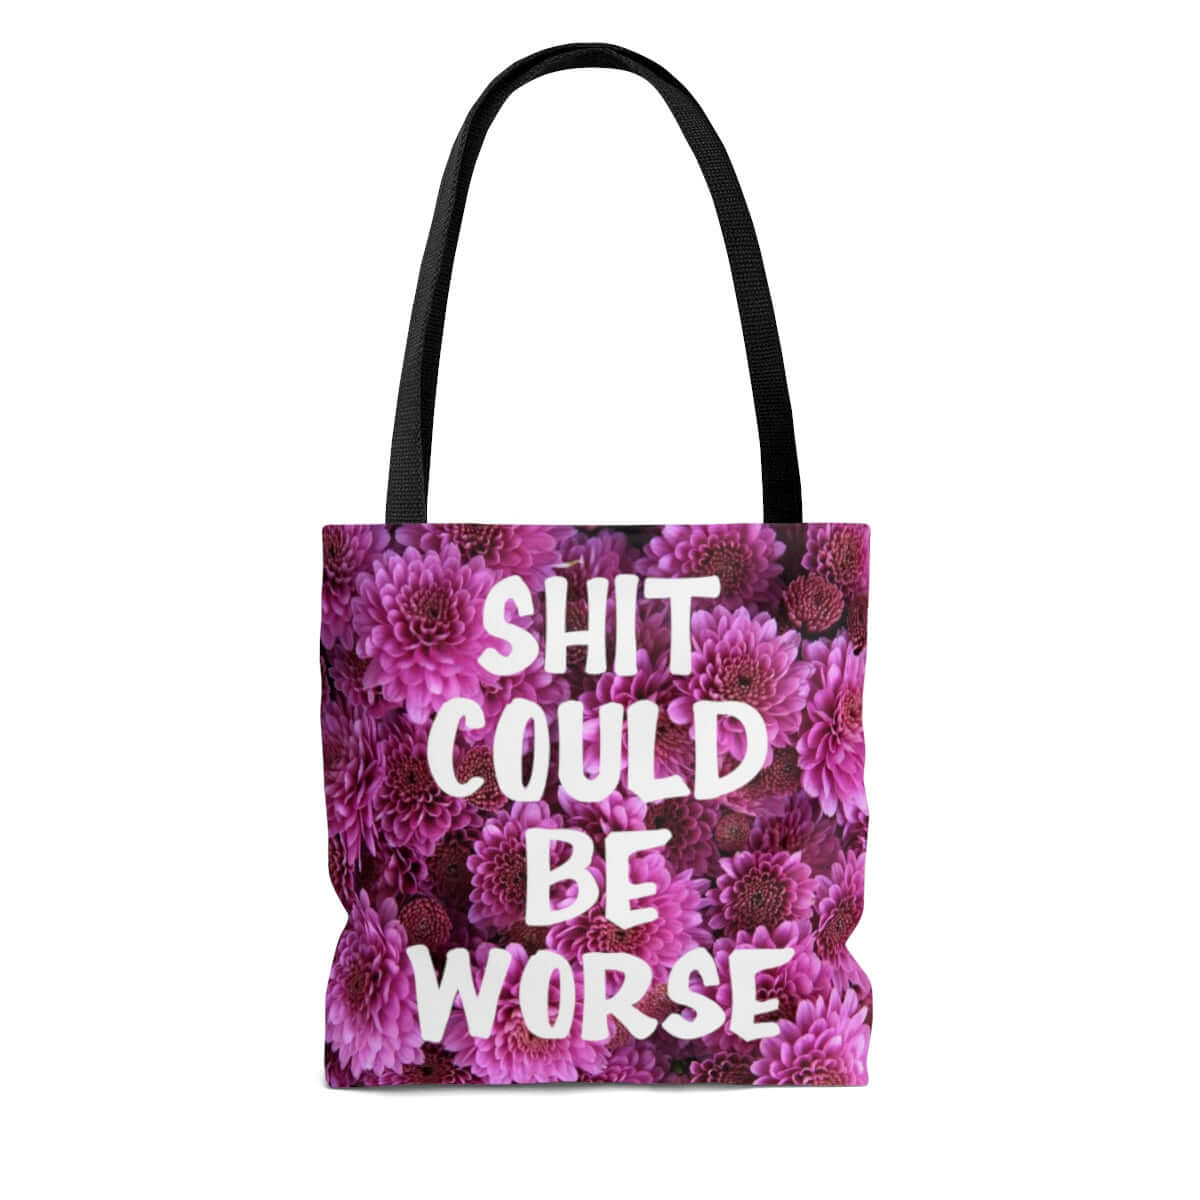 Shit could be worse floral print tote bag